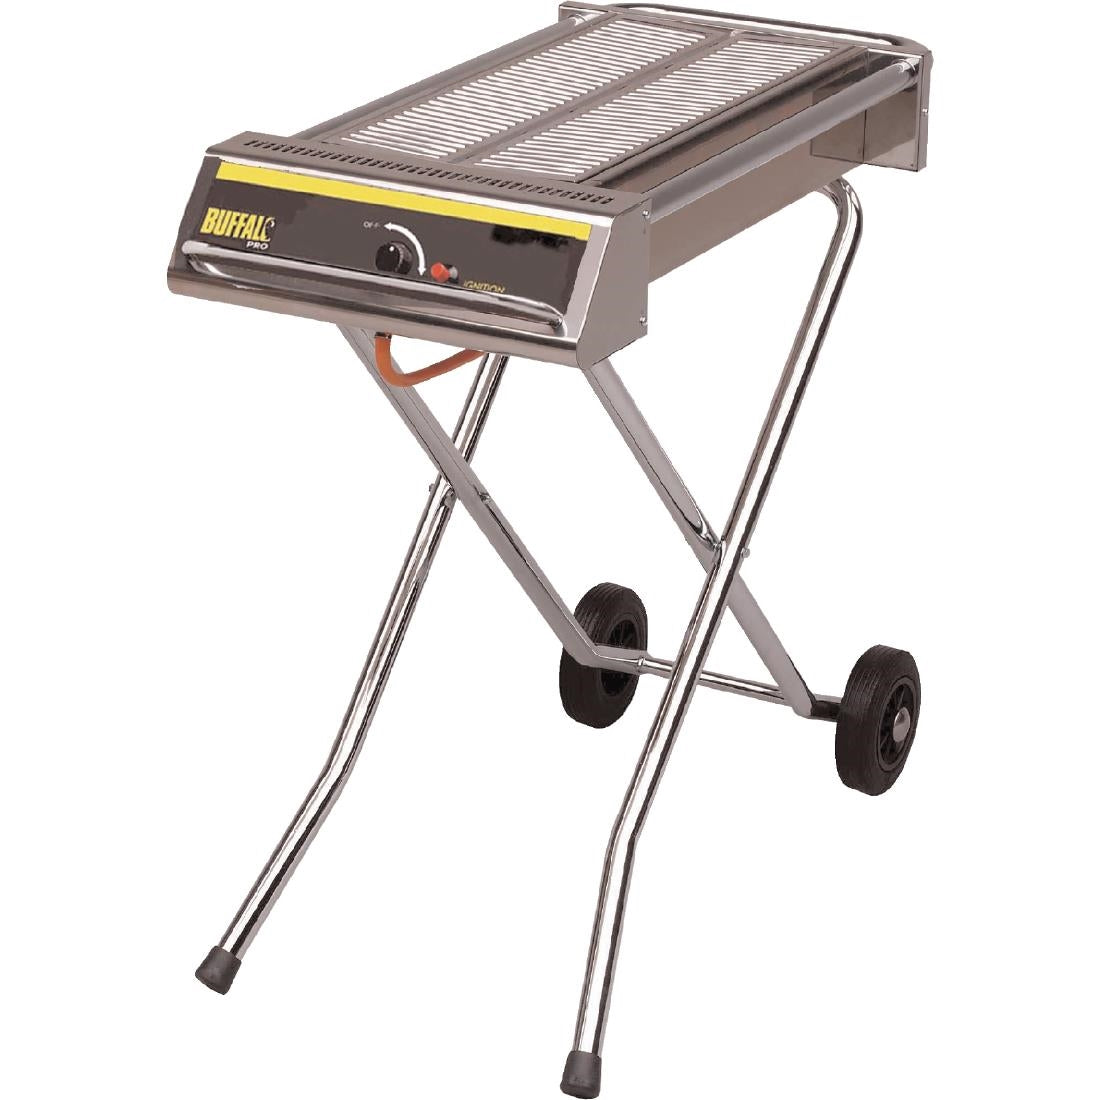 S502 SPECIAL OFFER Buffalo Folding Gas Barbecue And Free Folding Table